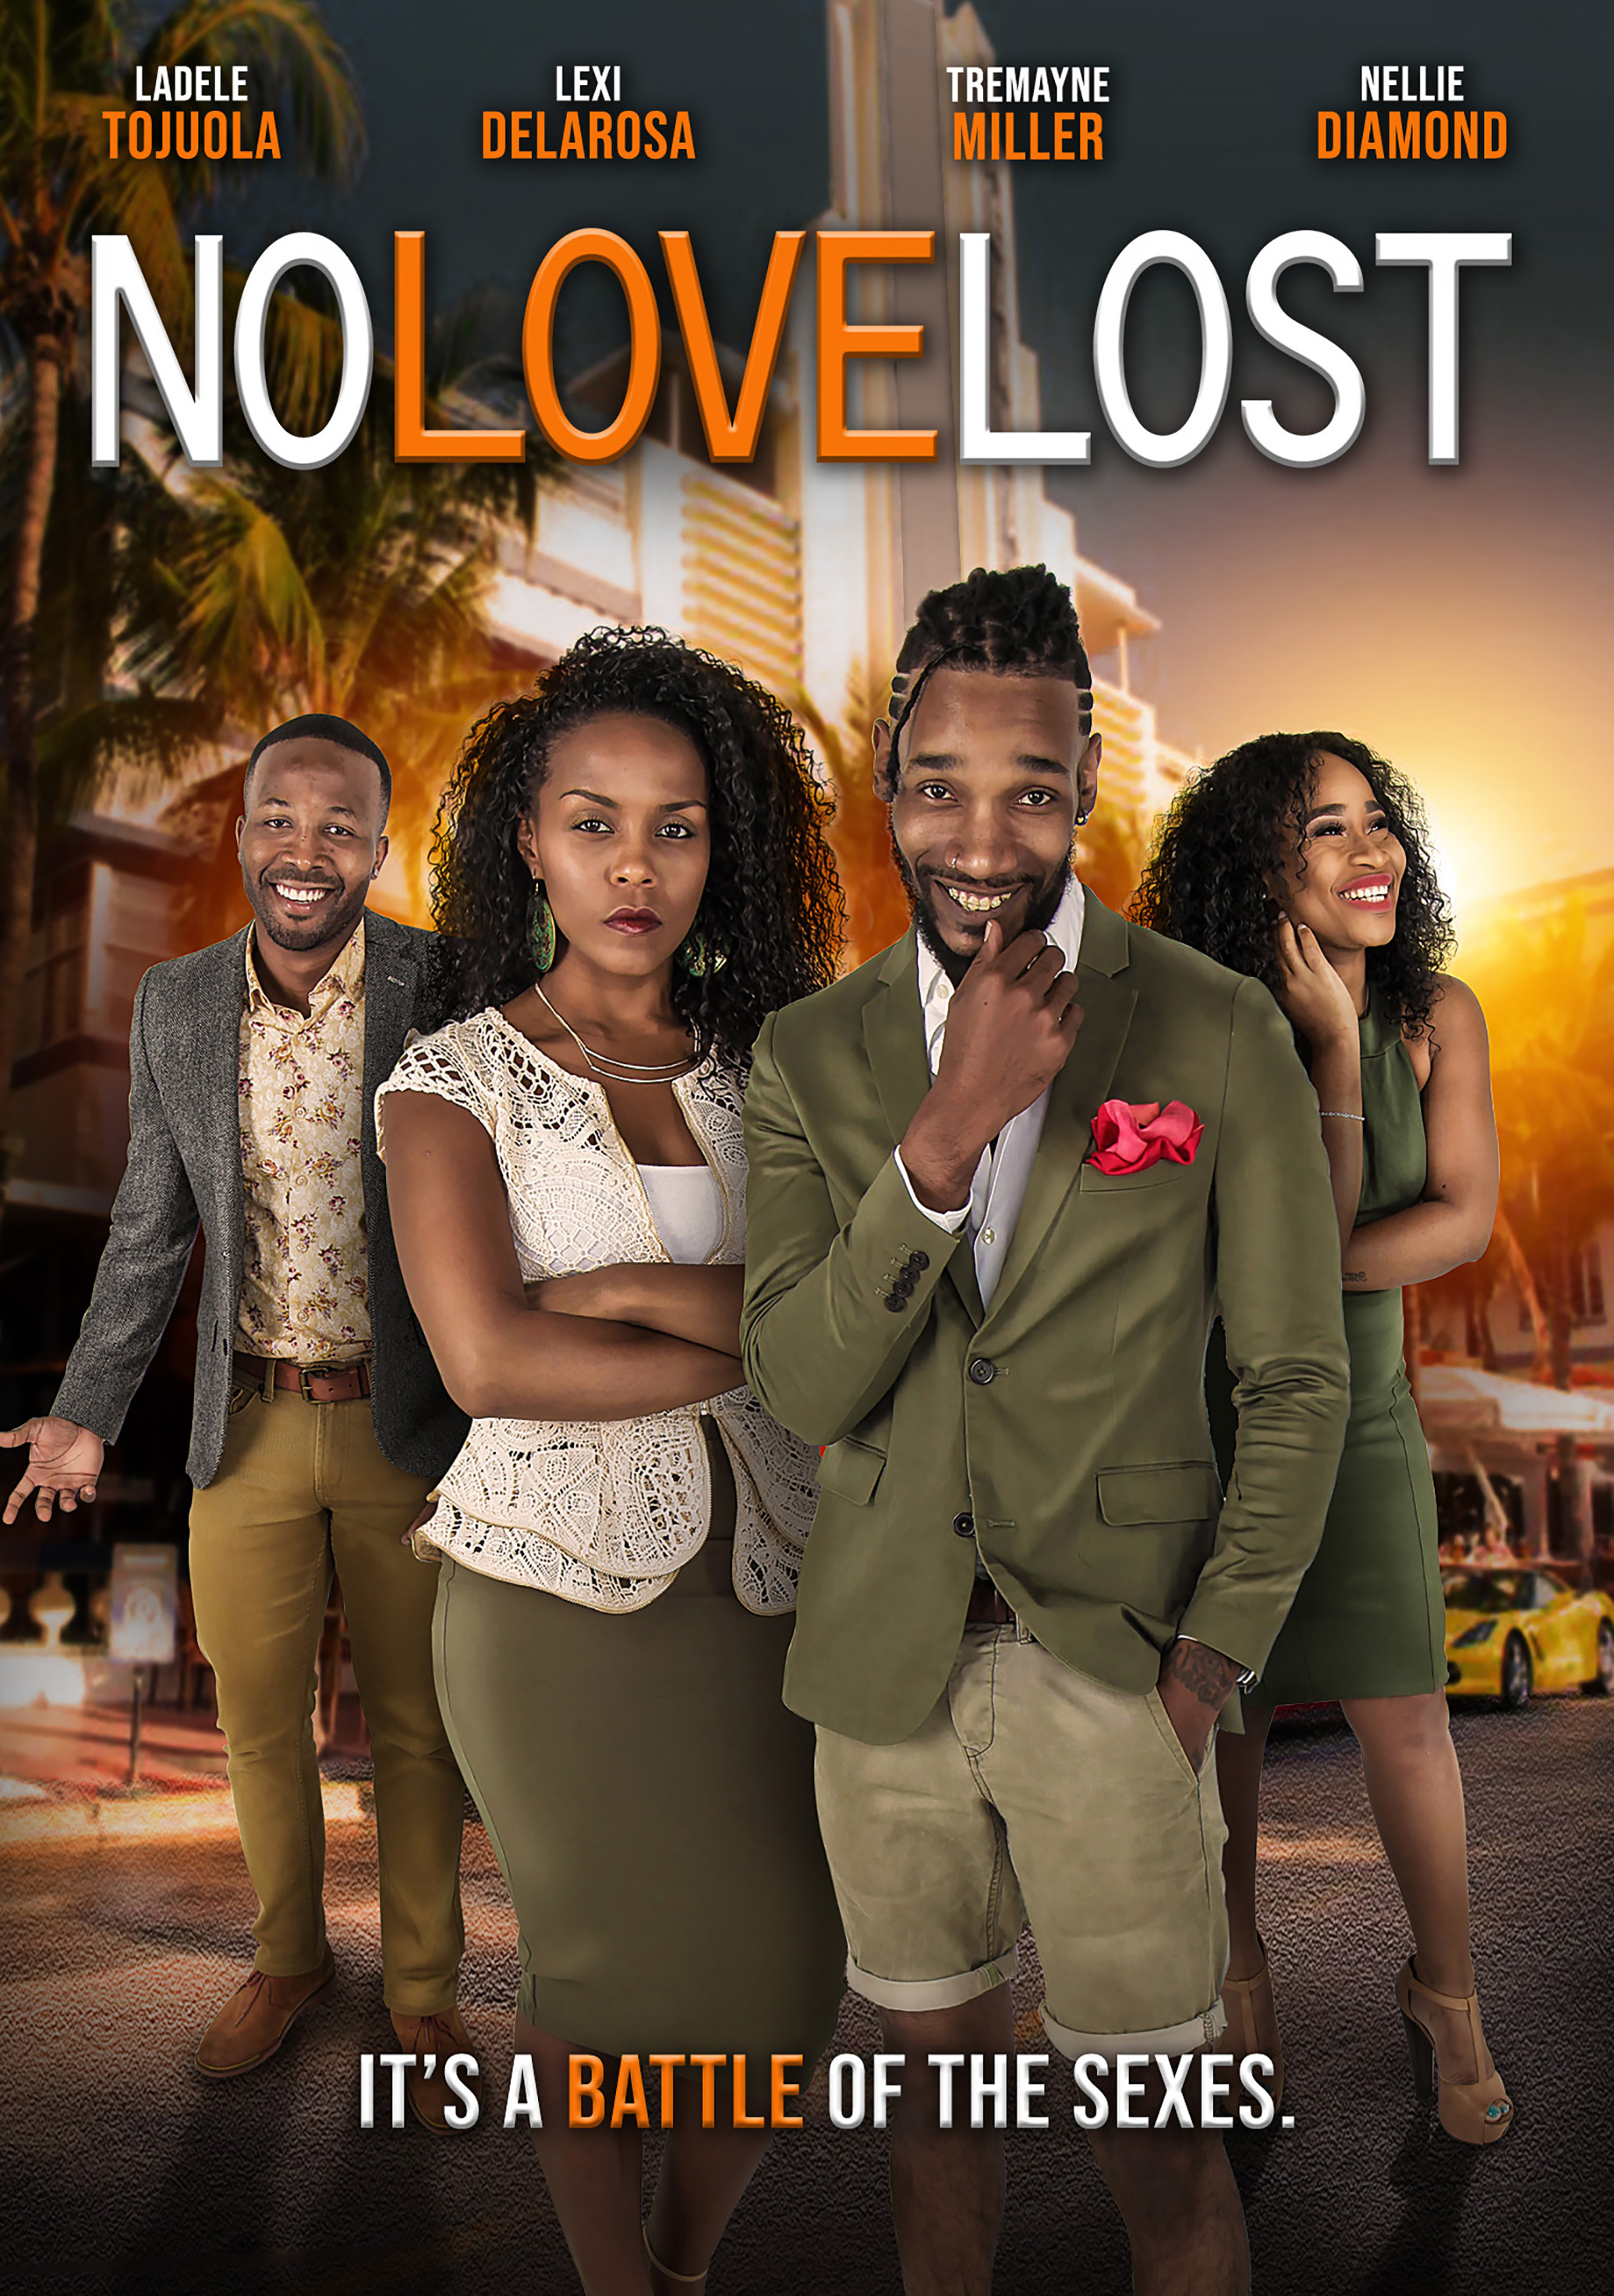 No Love Lost (2016) Thriller, Directed By Ricky W. Jean-Francois